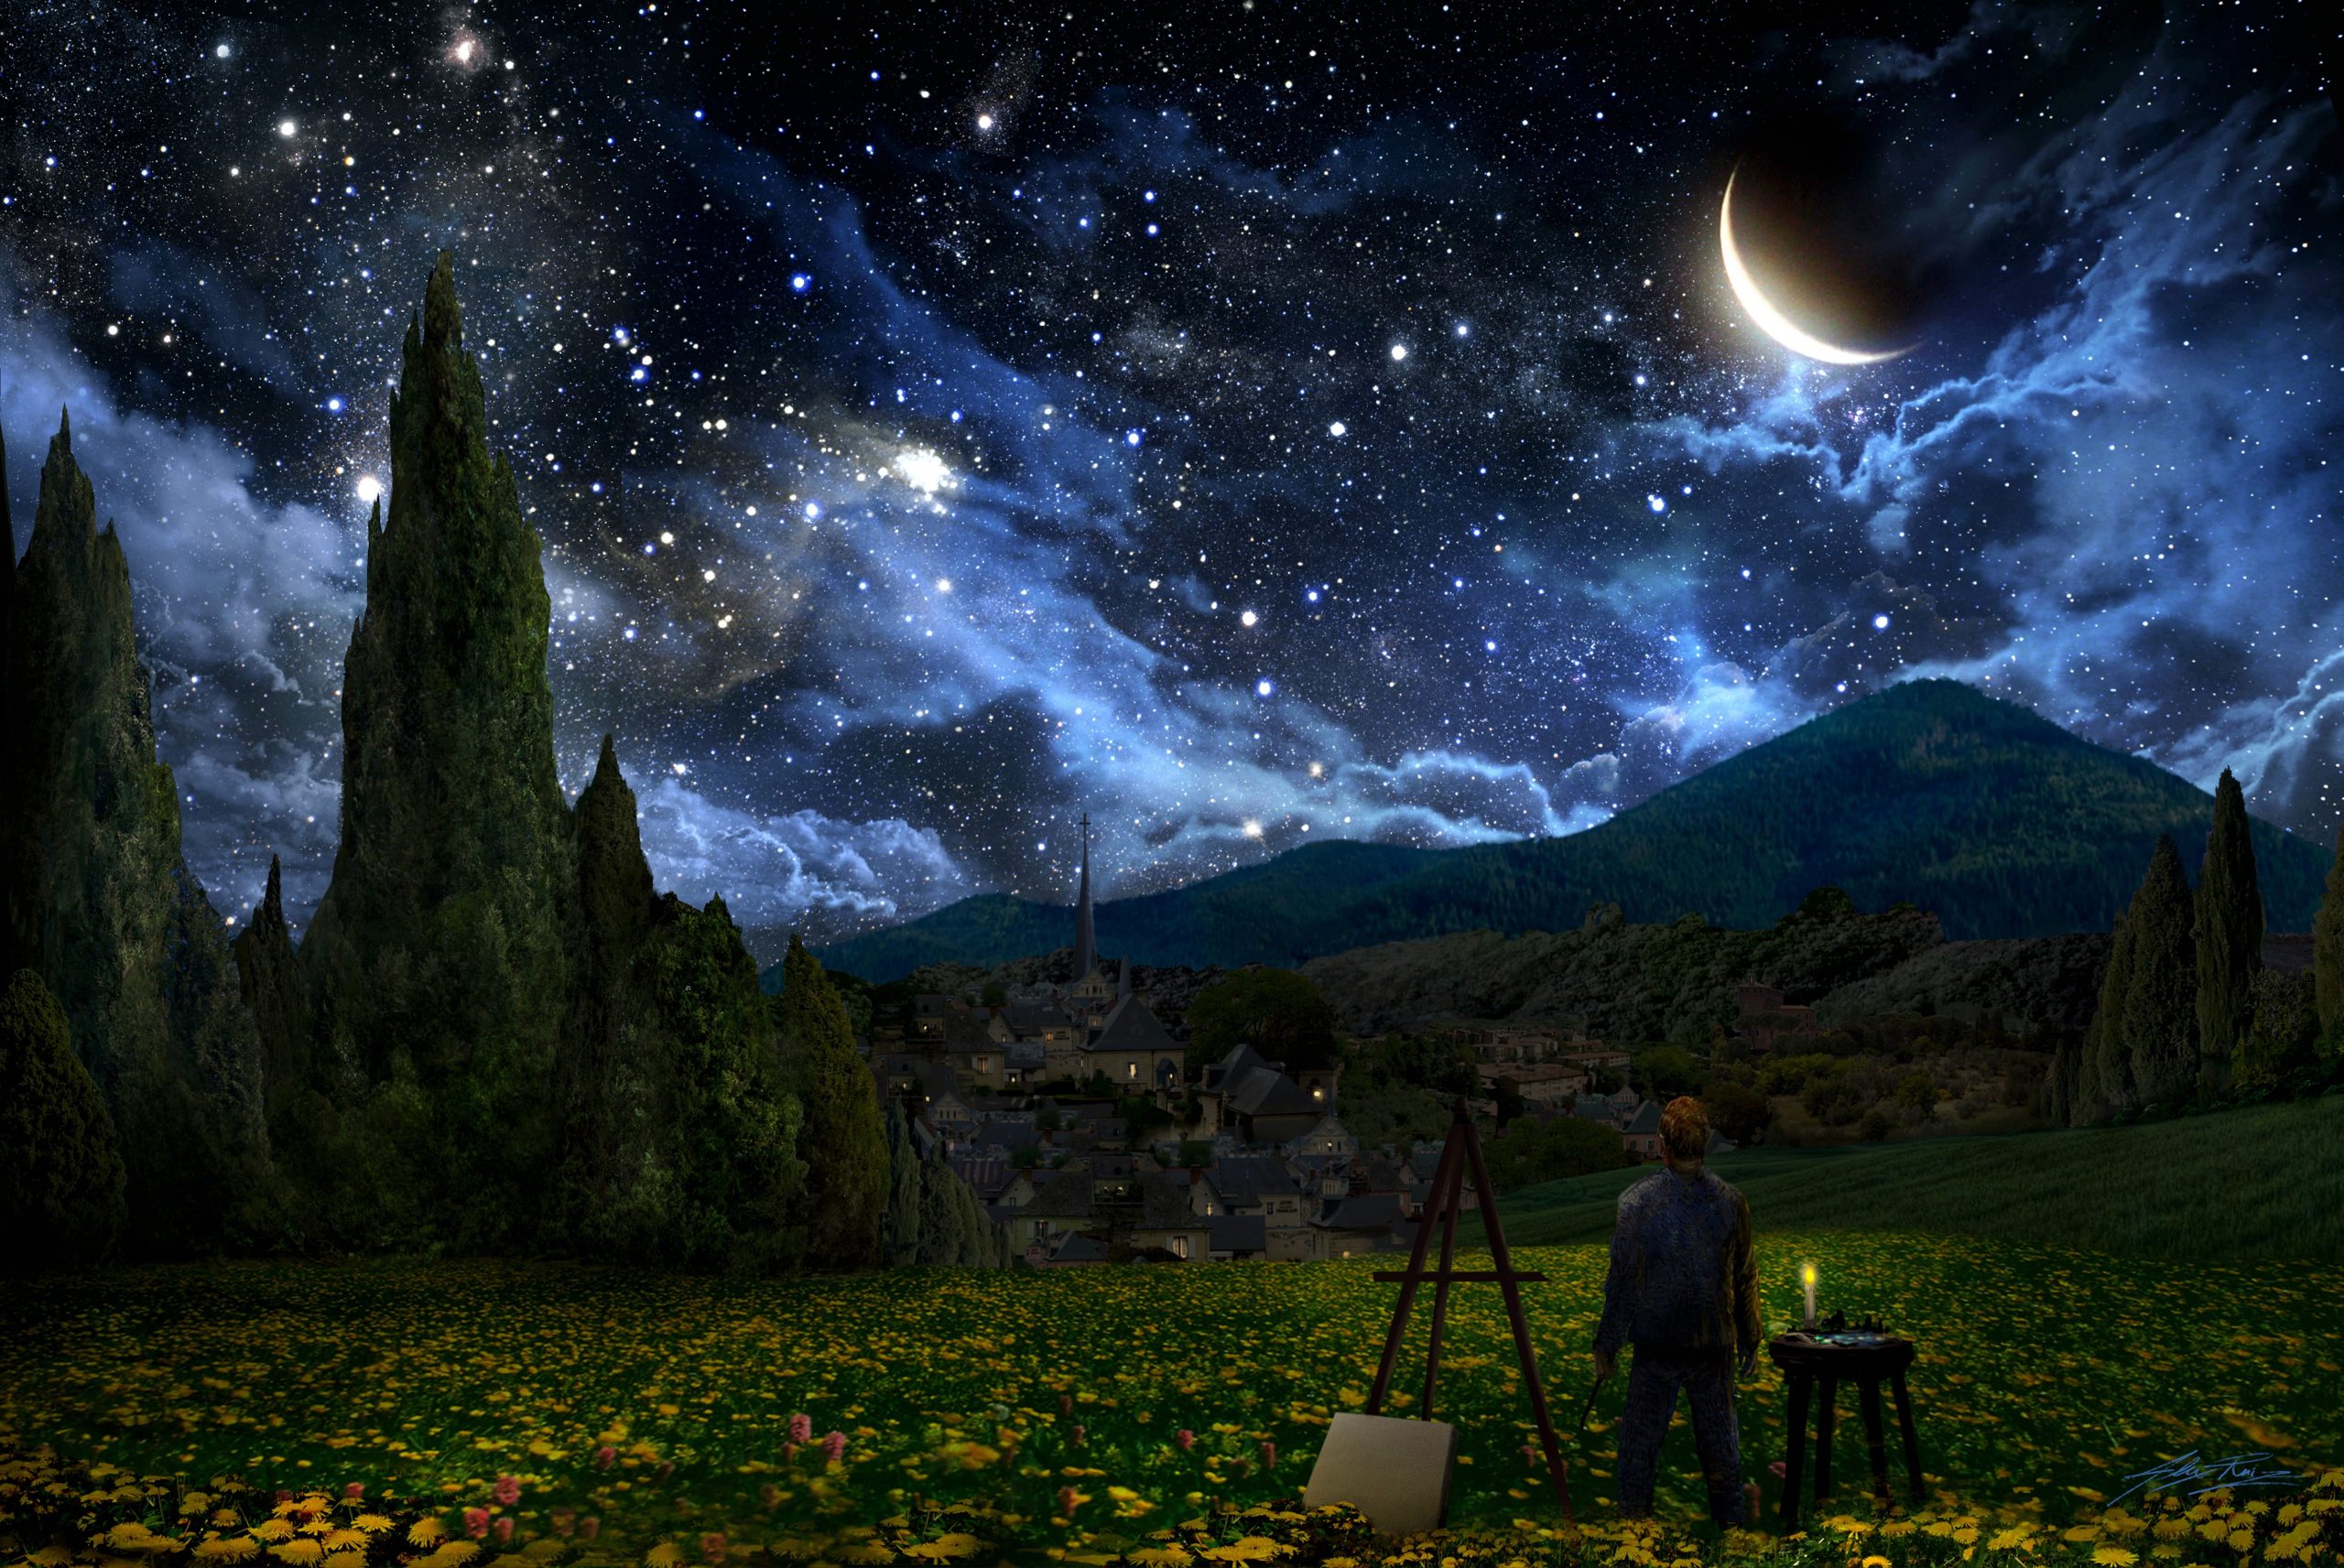 Man beside canvas with view of flower field under starry sky painting wallpaper